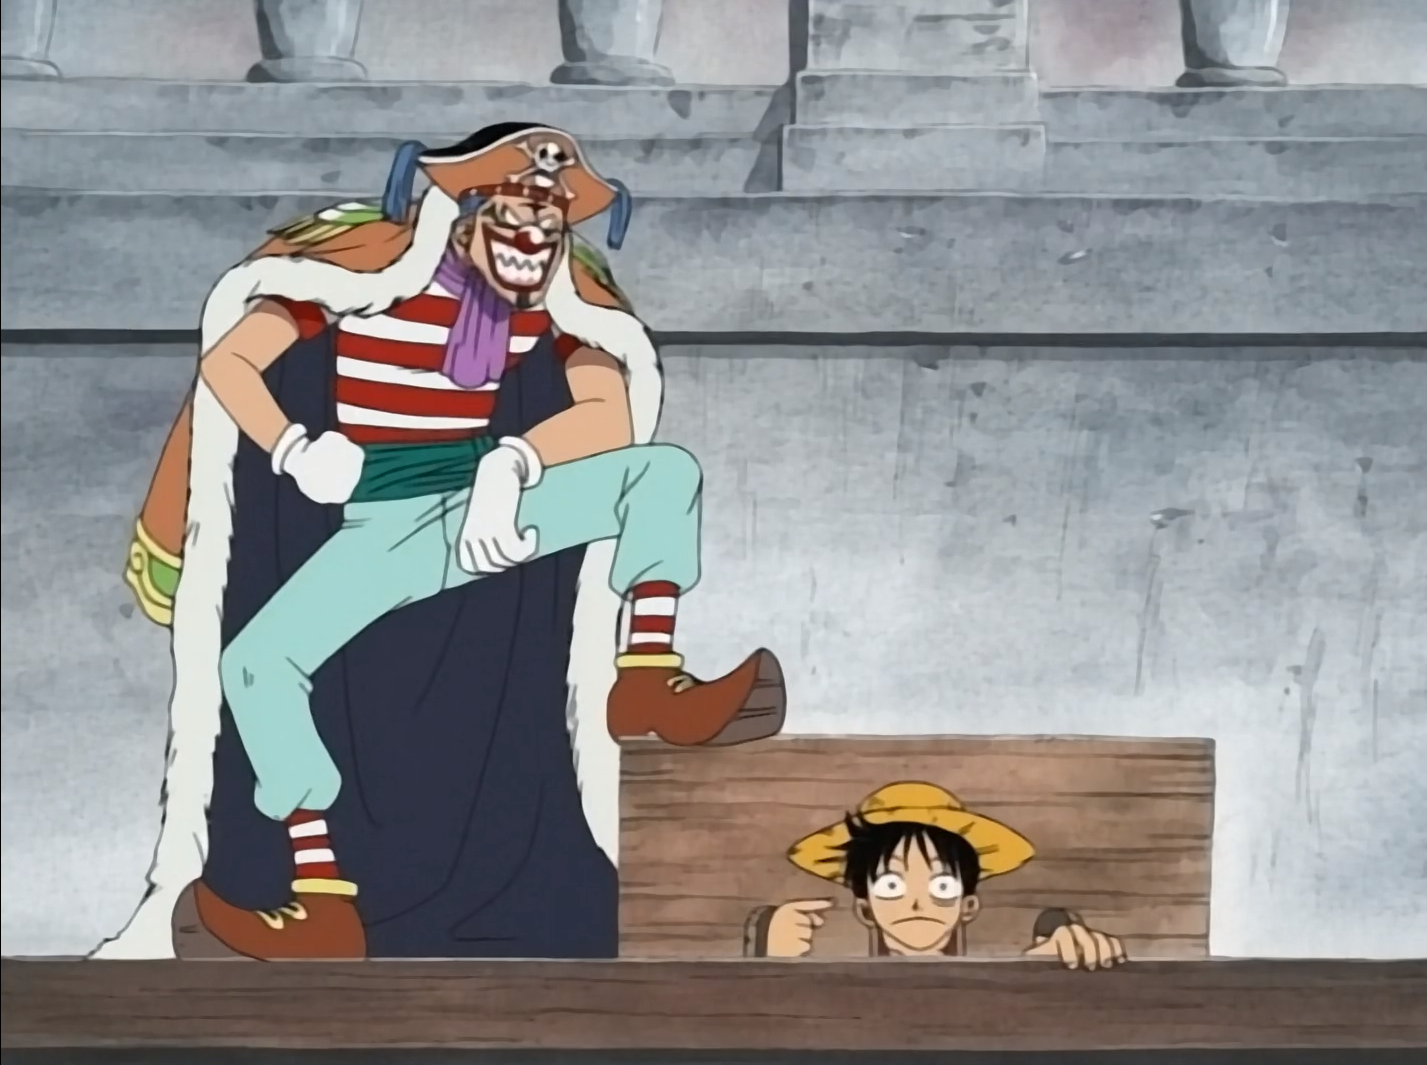 One Piece Buggy smiles as he is about to execute Luffy